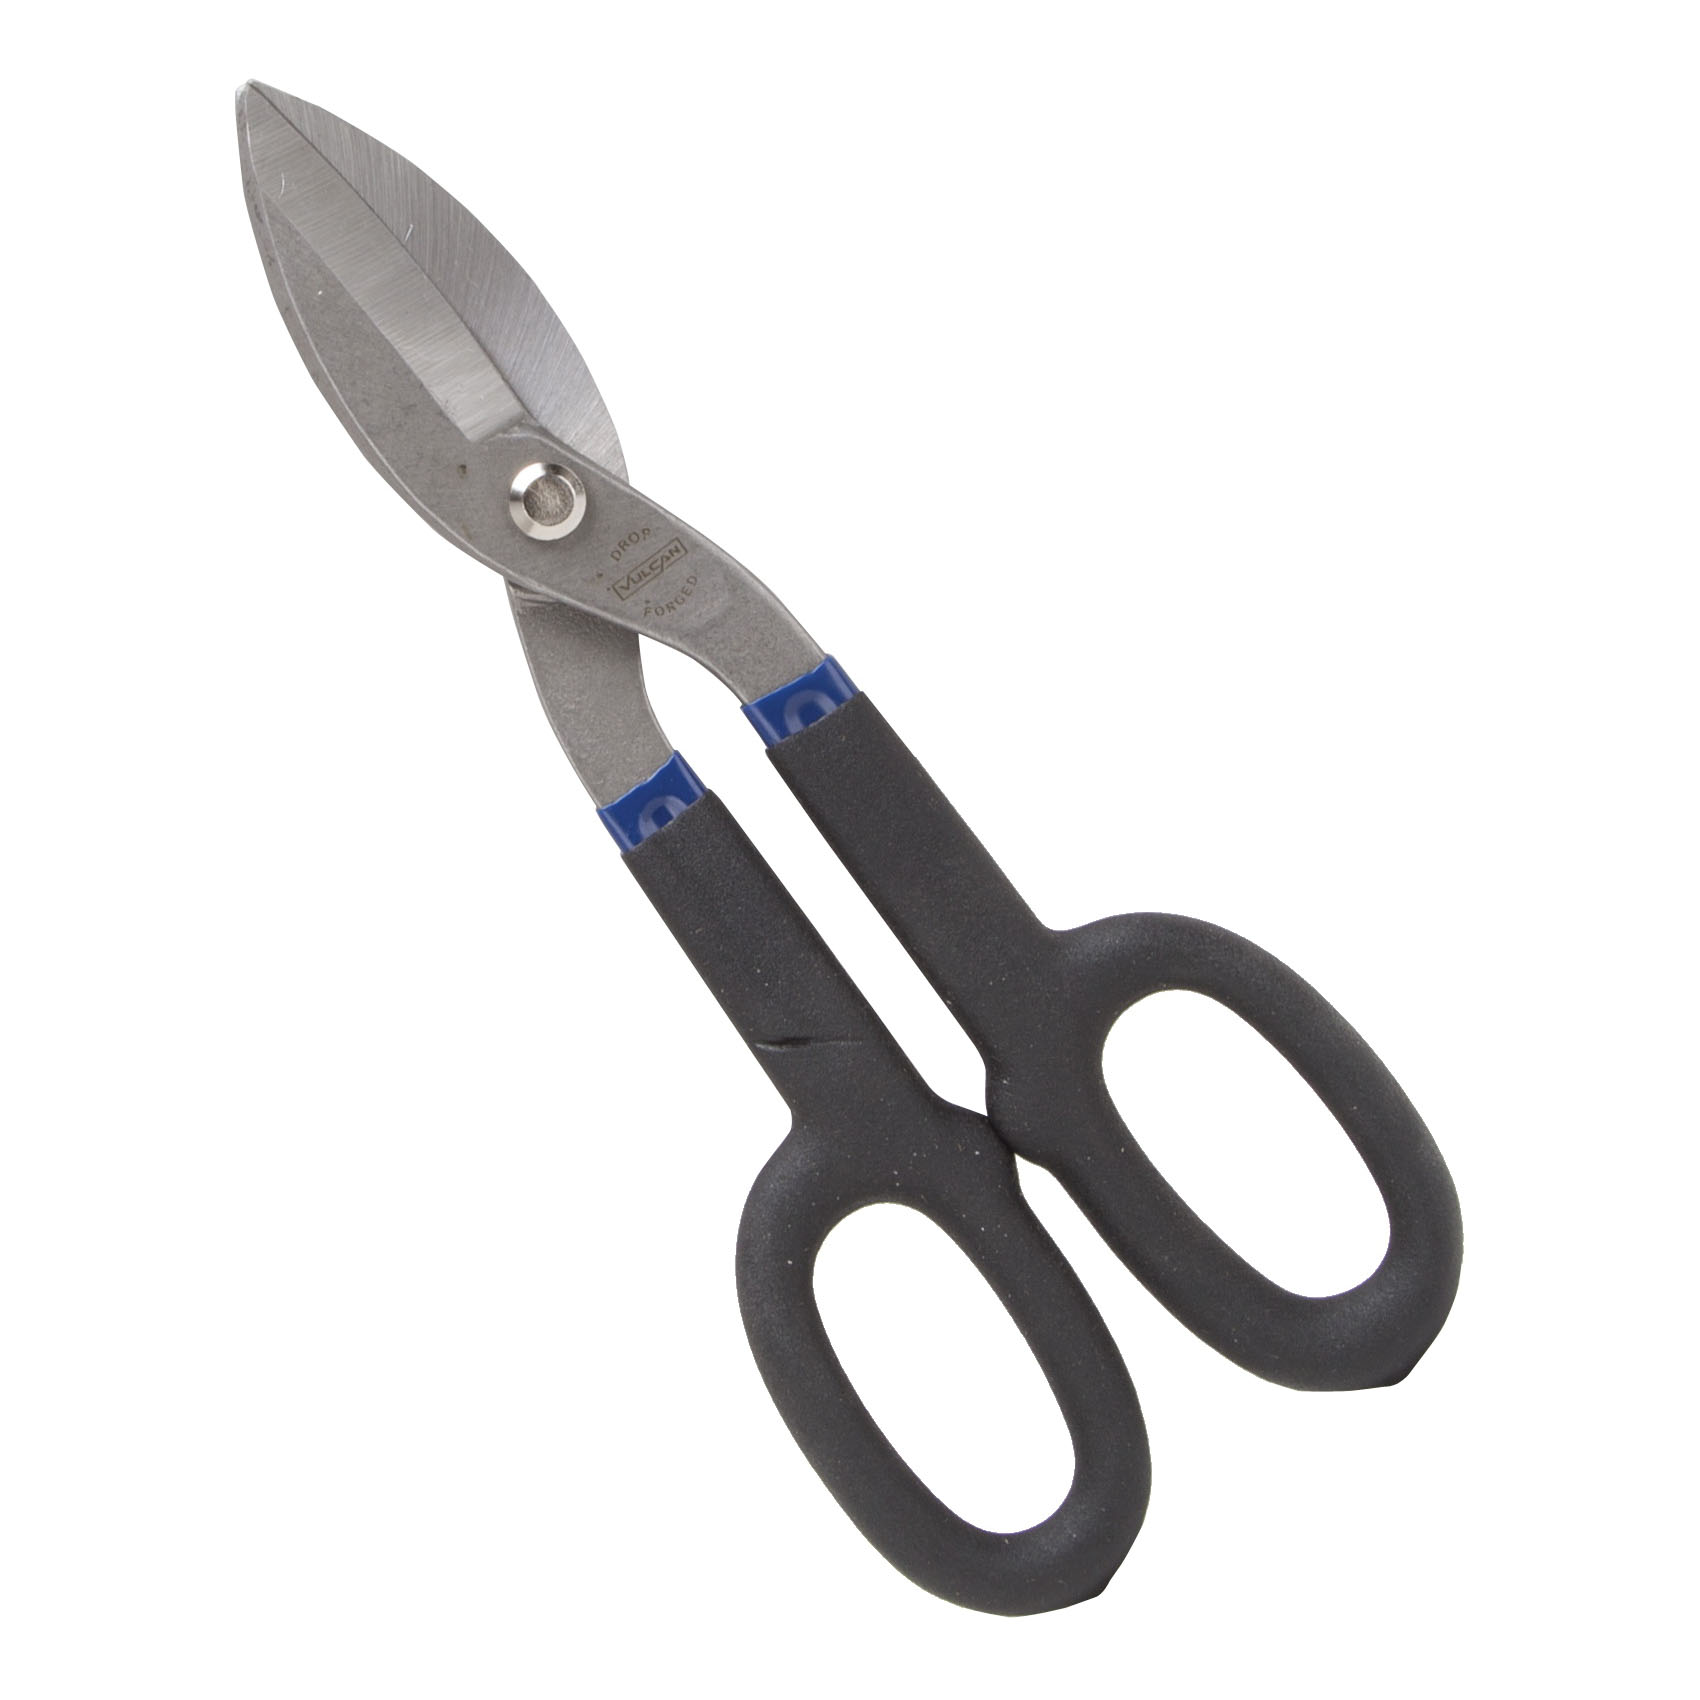 TS-01410 Snip, 10 in OAL, 2-3/4 in L Cut, Straight Cut, Carbon Steel Blade, Non-Slip Grip Handle